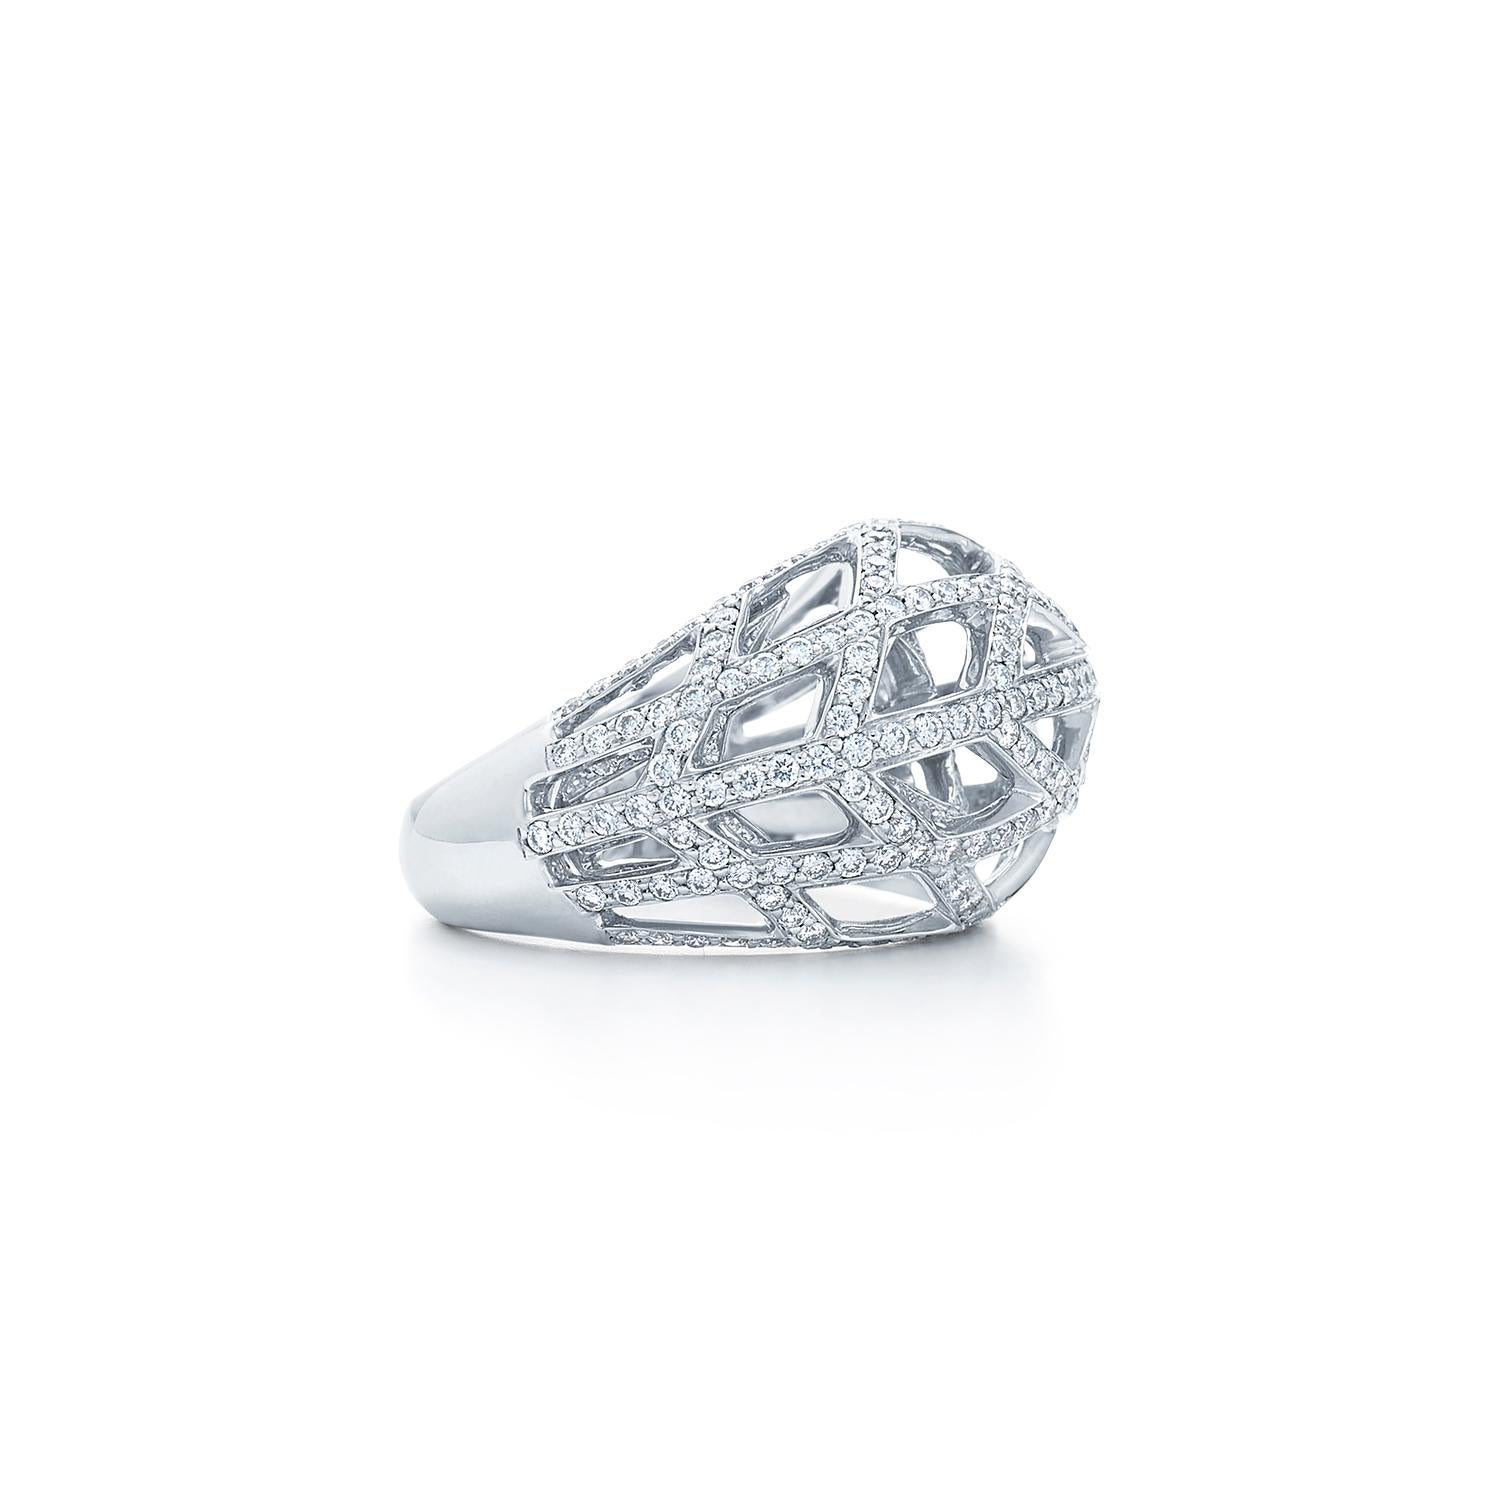 18k White Gold Diamond Ring, Signed Kwiat

This diamond ring is from the Jacquard Collection with 290 round brilliant diamonds totaling 1.62 carats, FG/VS mounted in 18k white gold,  Ring size is 6.  The original retail was $15,500

Since 1907,